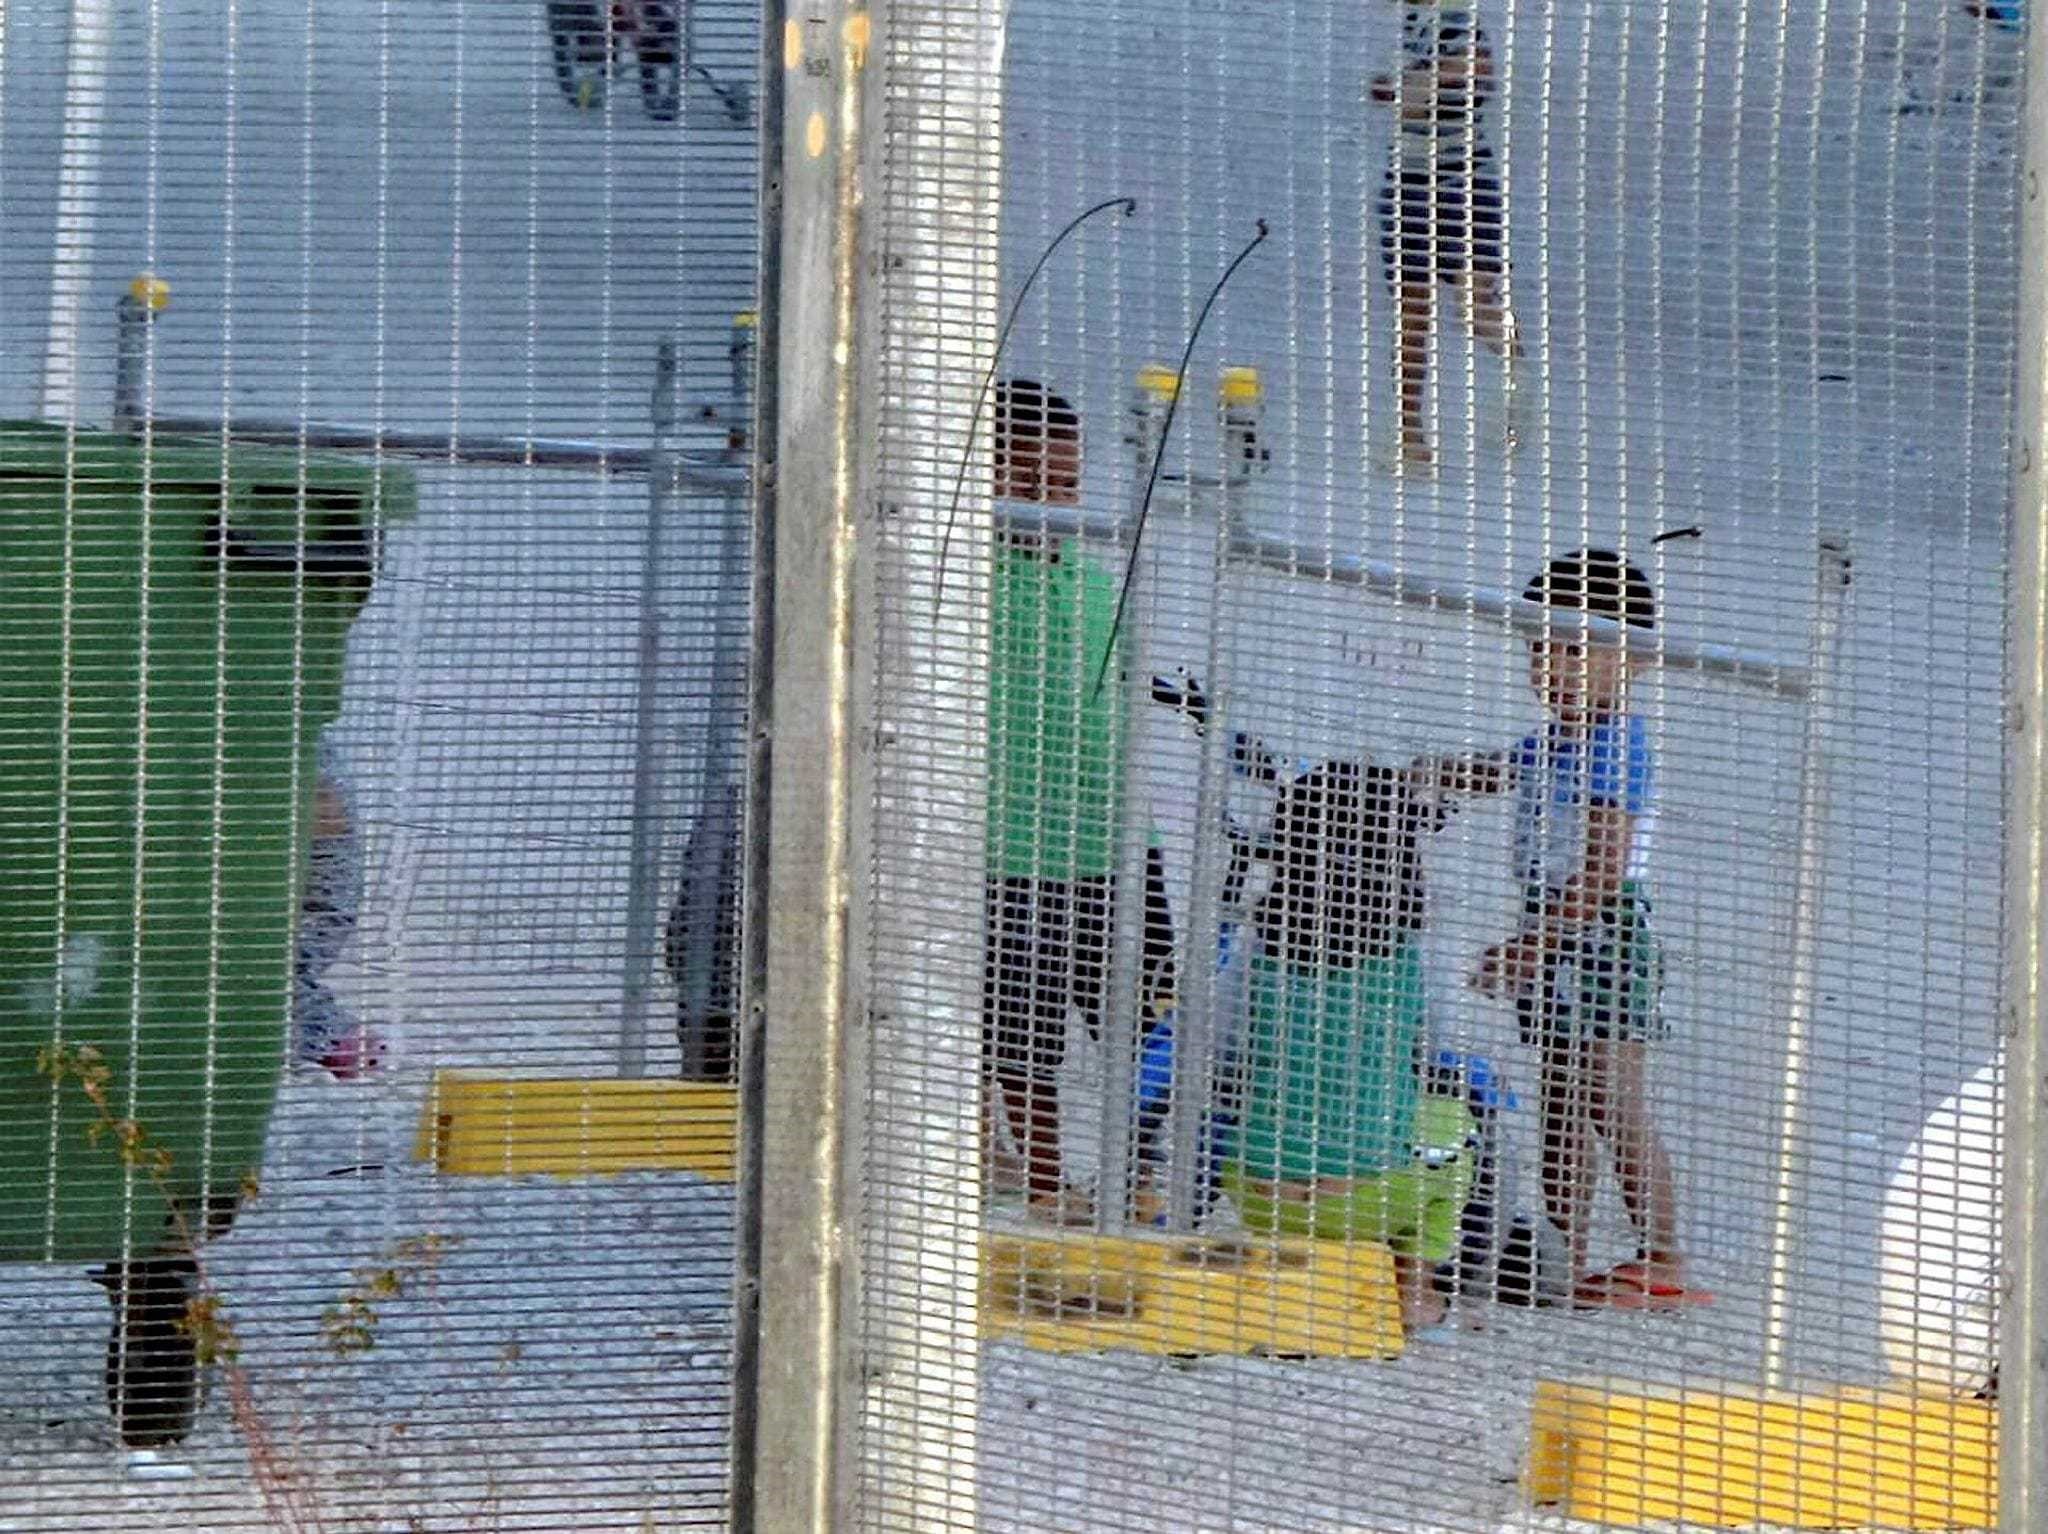 Children play near a fence at the country's Australian-run detention center on the Pacific island nation of Nauru.